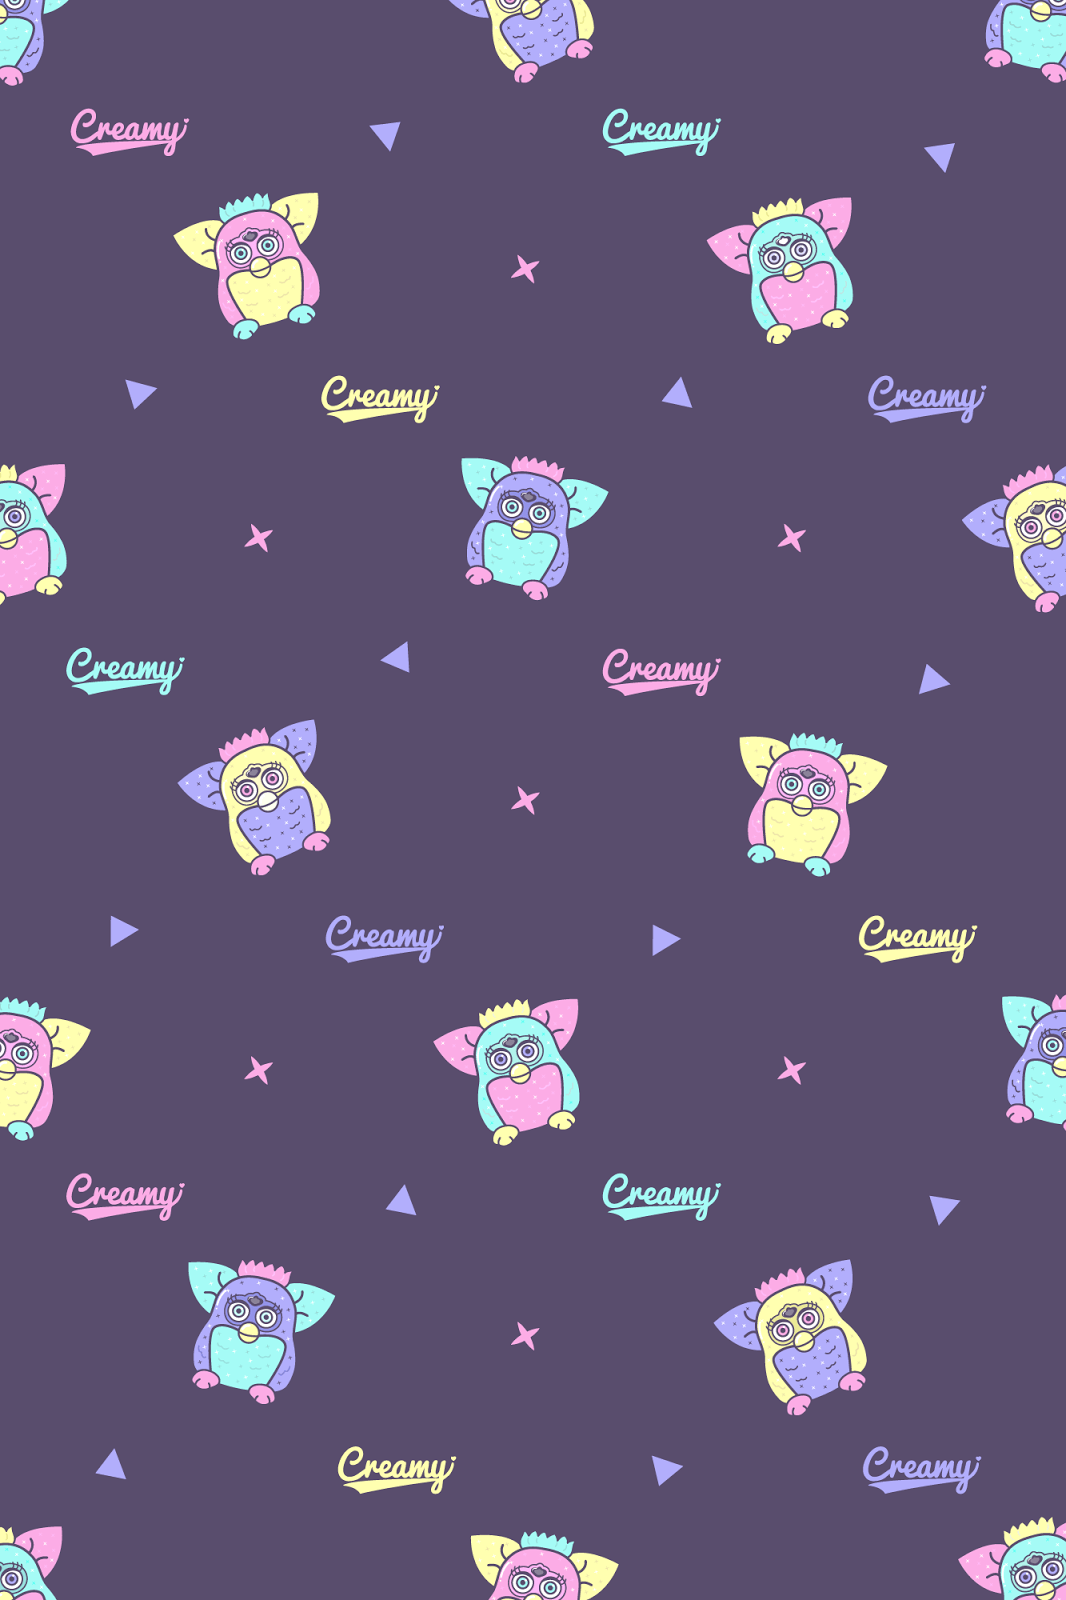 Fun wallpaper for your phone ♥